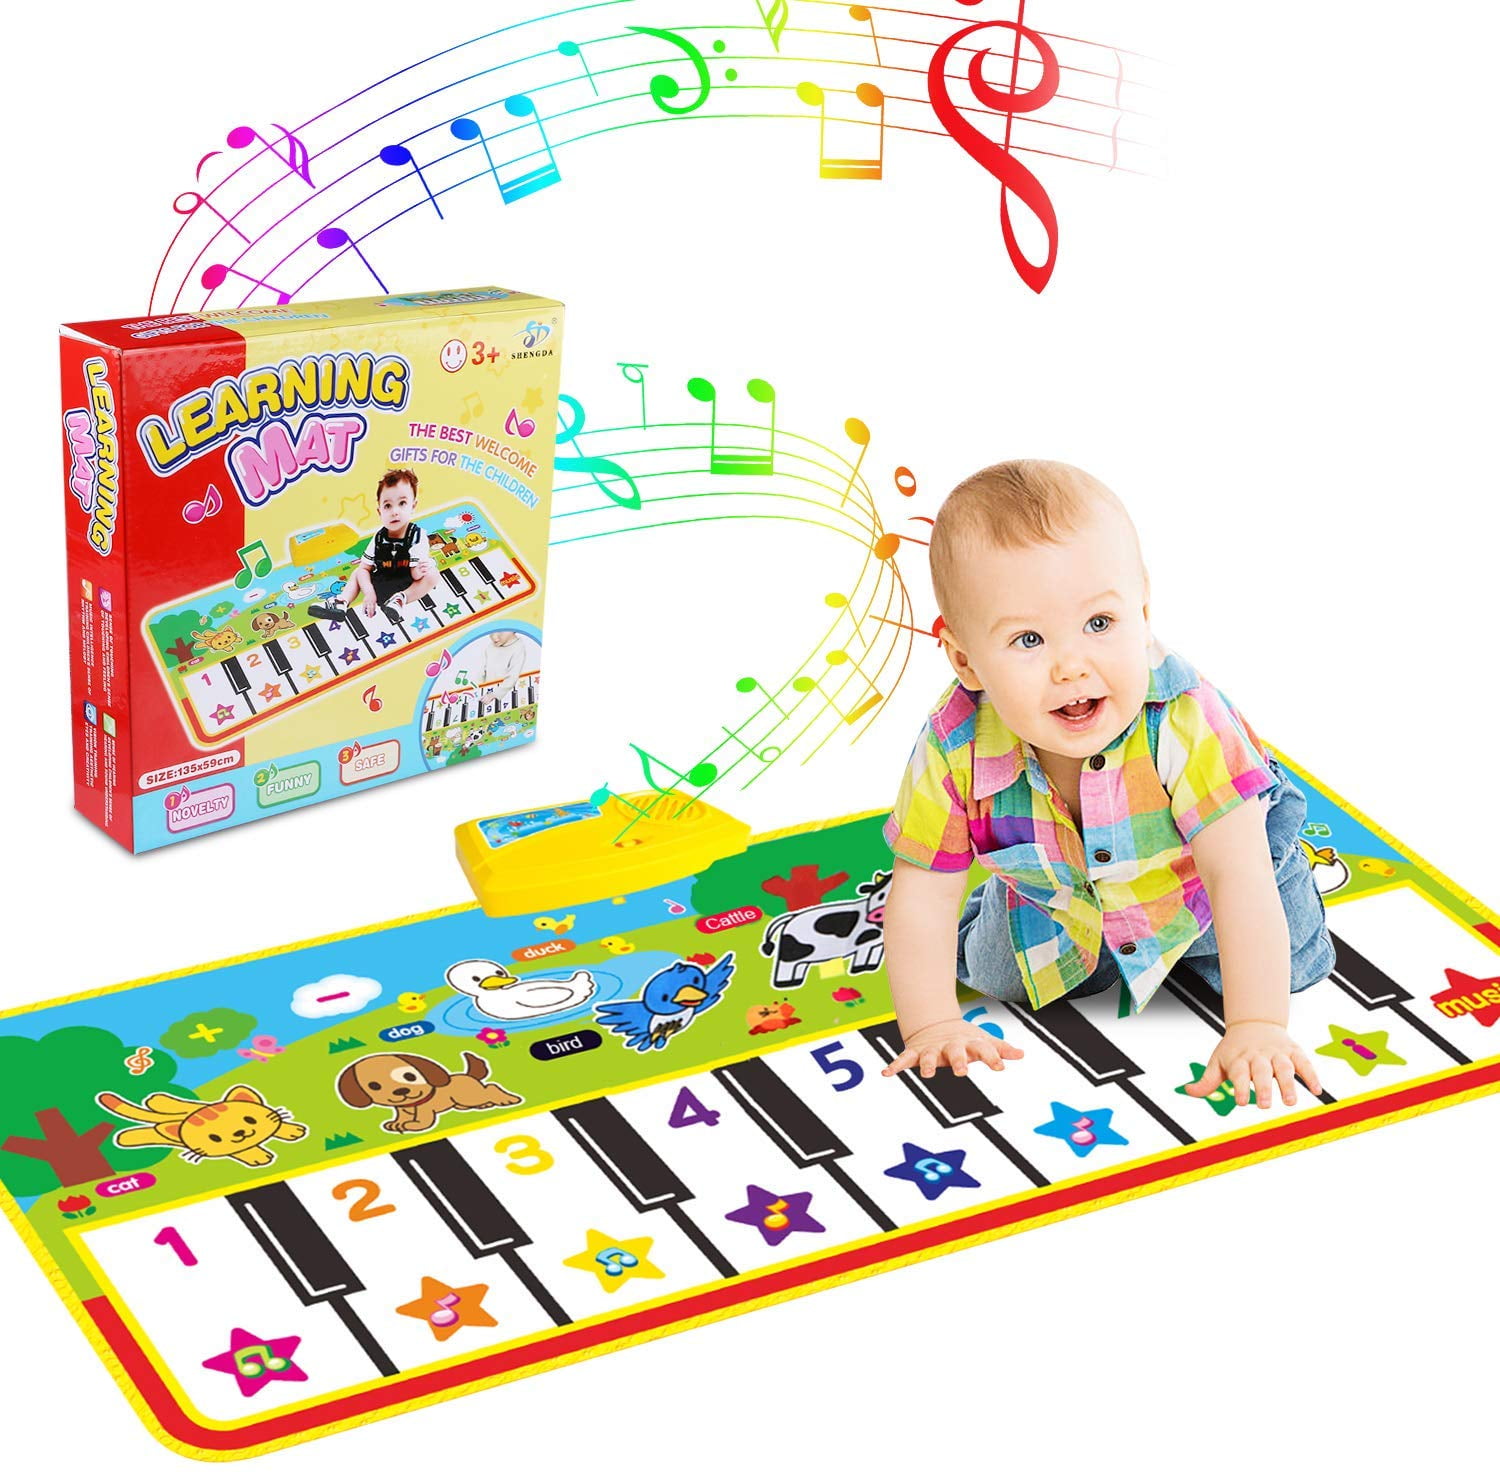 Kids Portable Dance Musical Toy Music Floor Piano Touch Play Mat Early Educational Gifts Toys for 1 2 3 4 5 Year Old Girls Boys Toddlers TWFRIC Piano Mats with 38 Sounds 